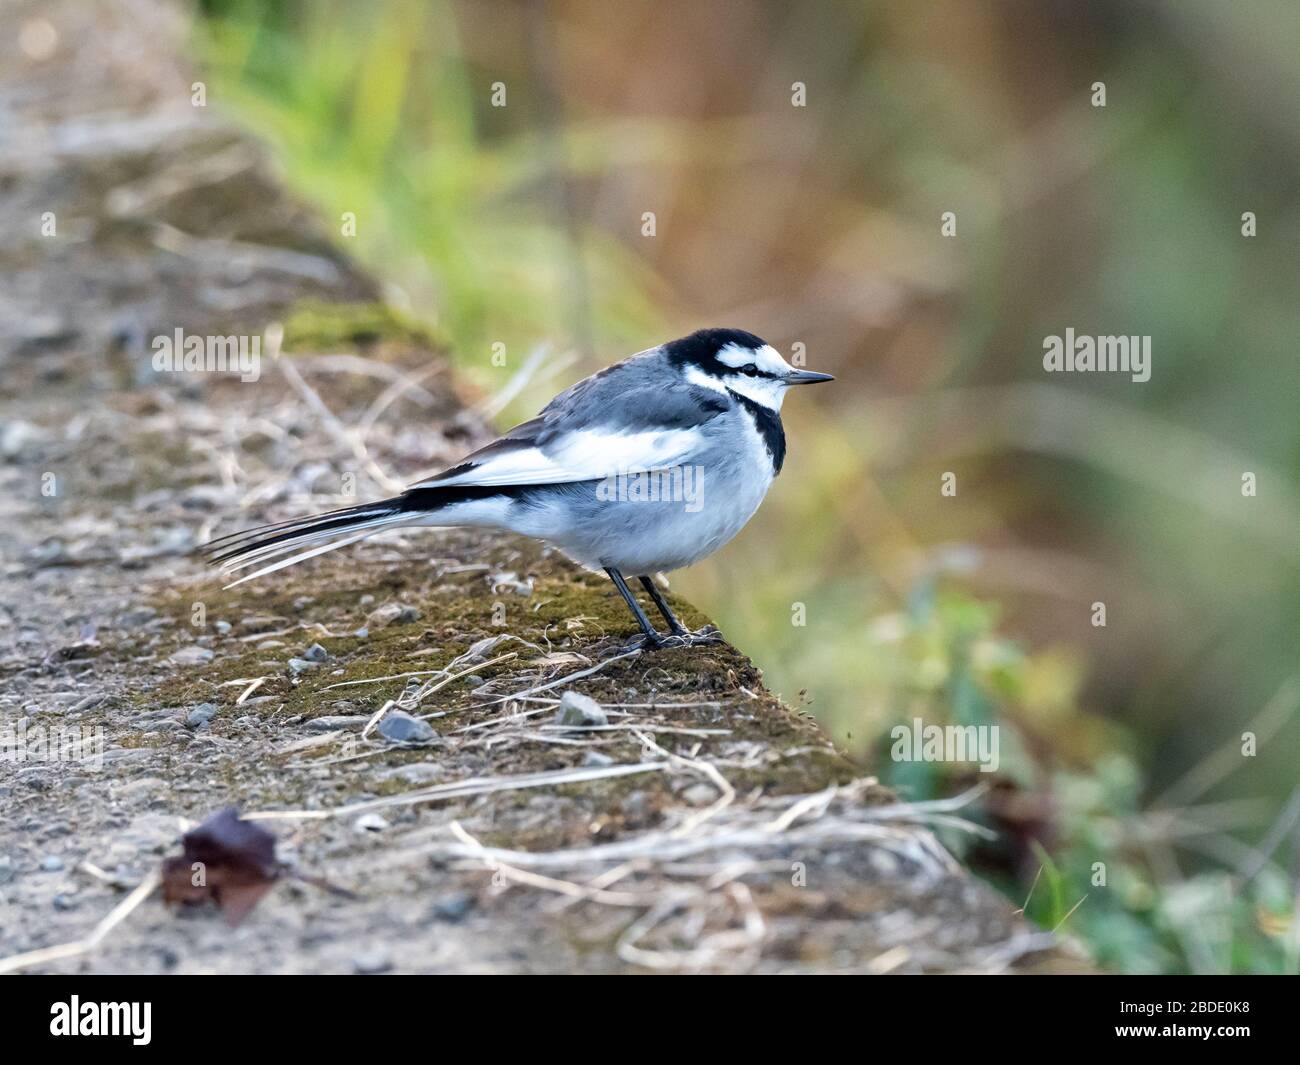 A Japanese white wagtail, Motacilla alba lugens, walks along the bank of a small river in central Kanagawa Prefecture, Japan. Stock Photo